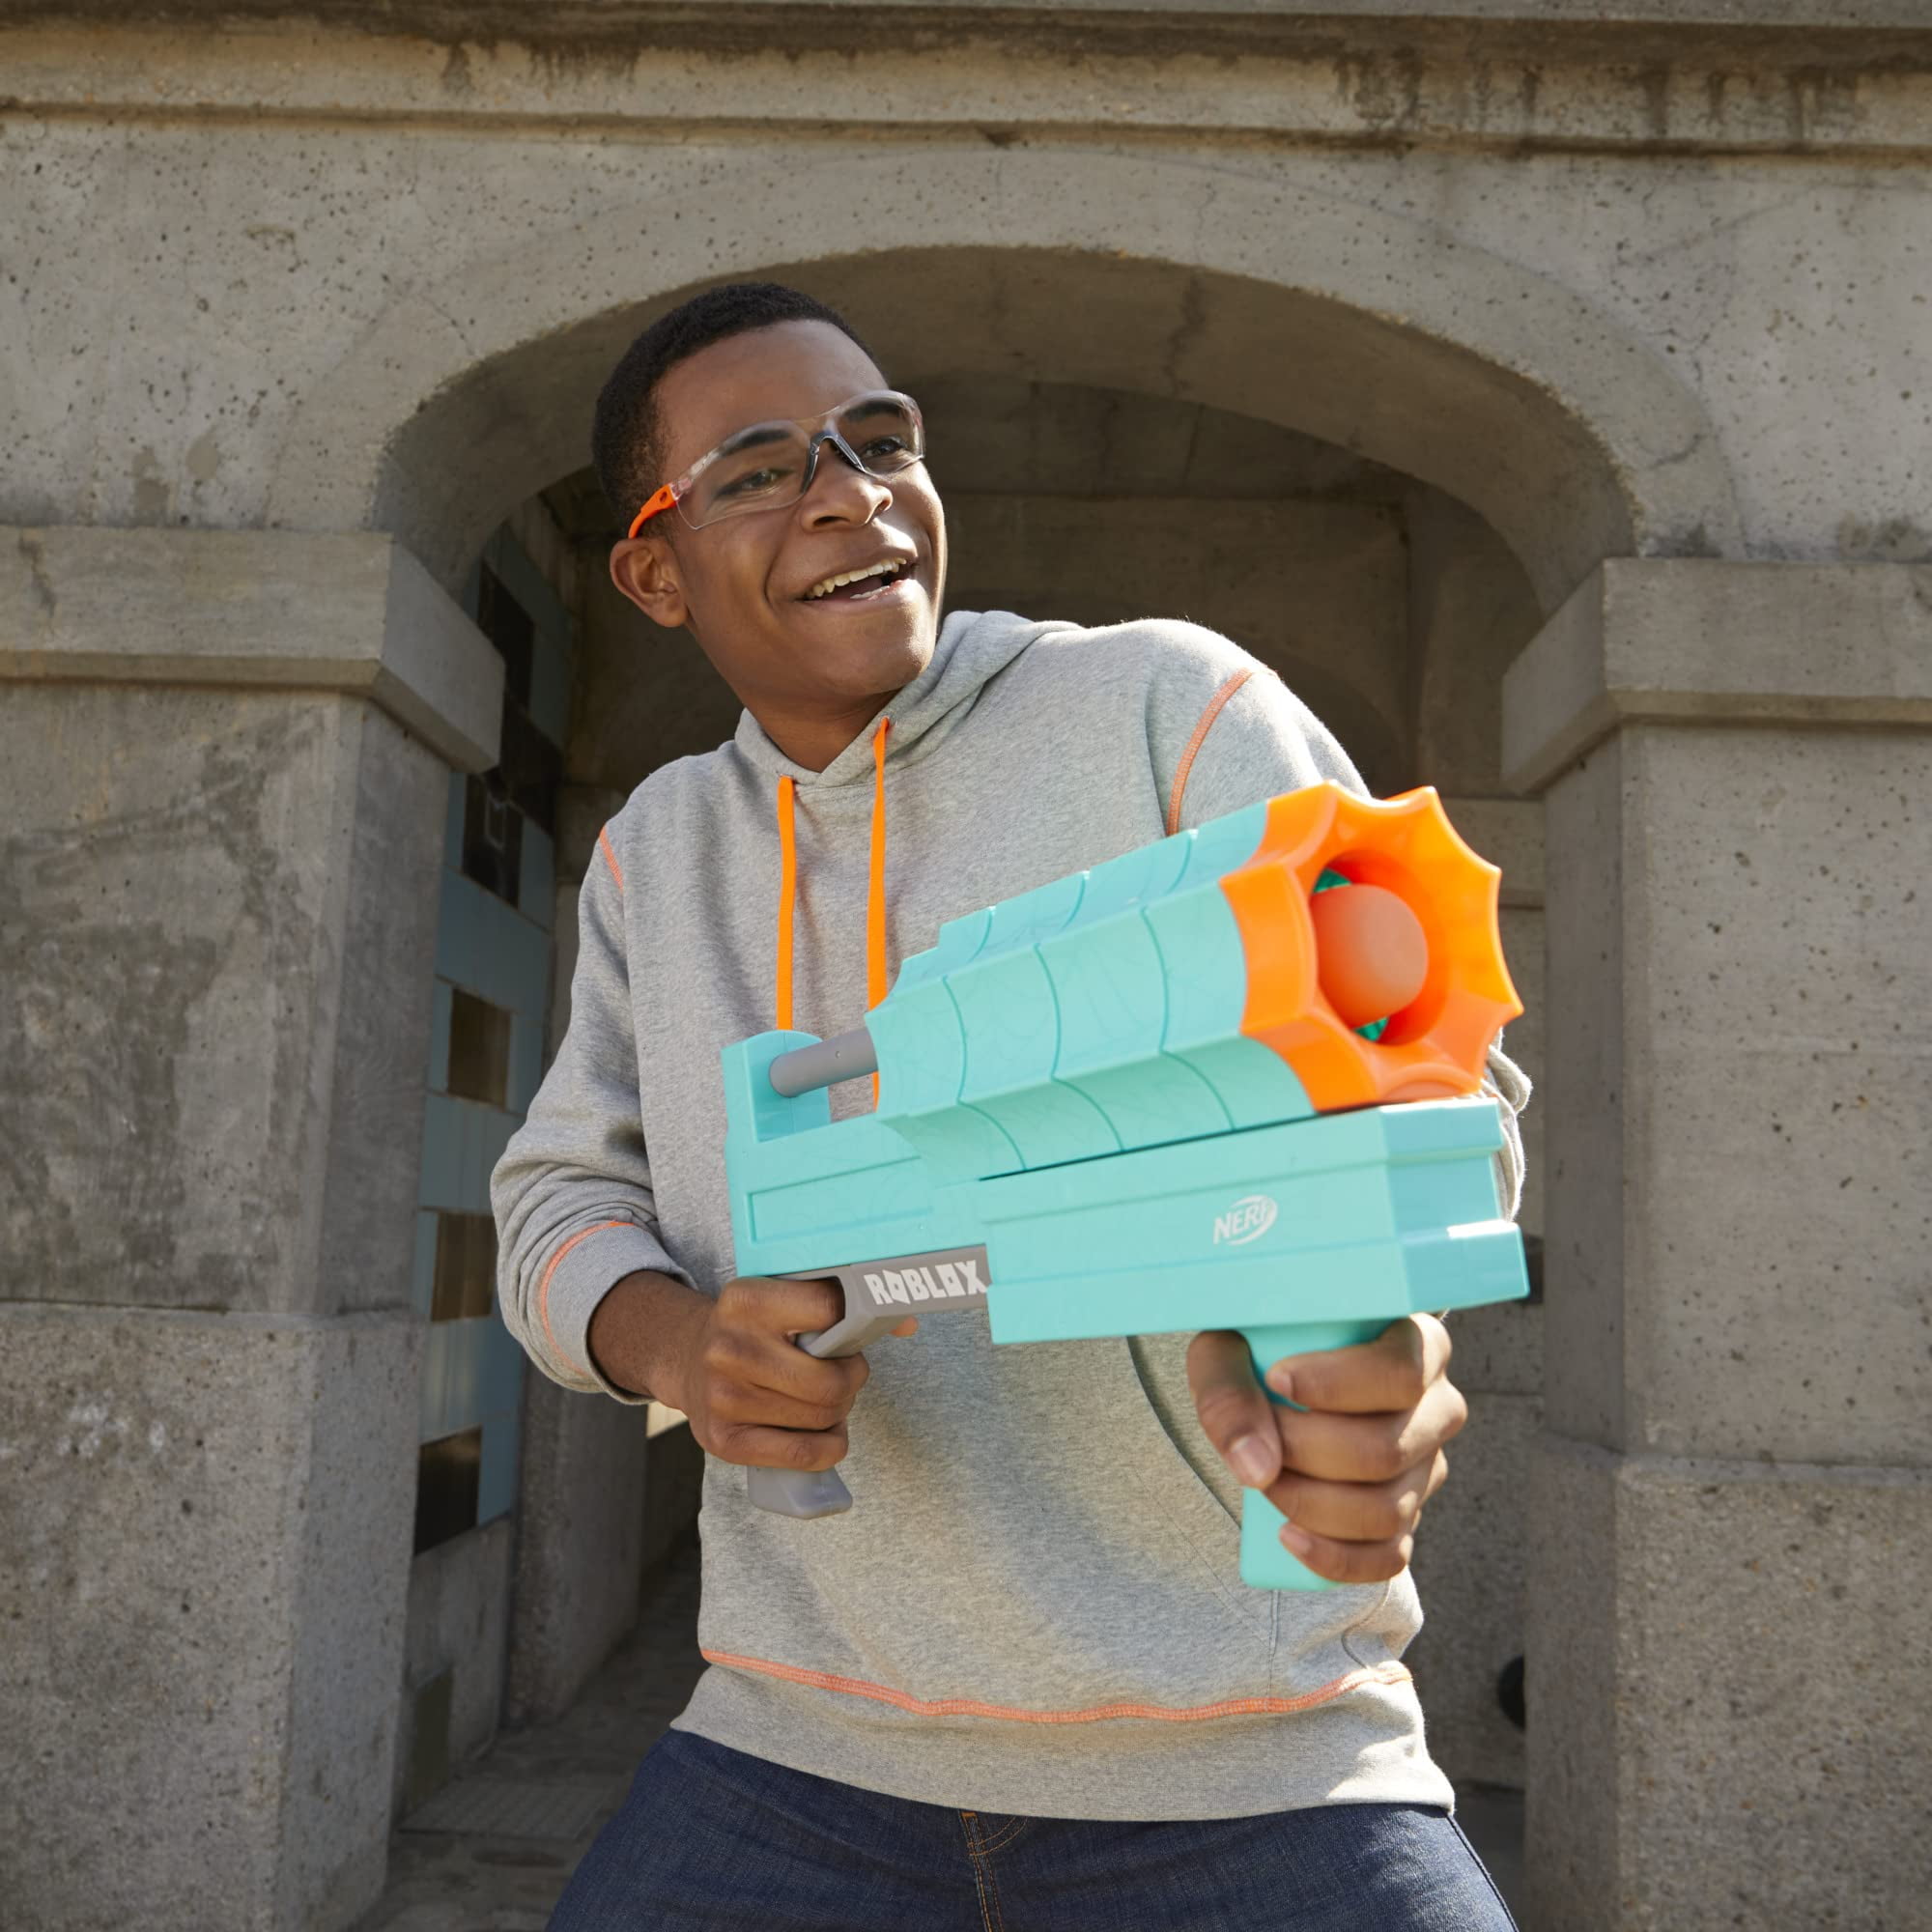  NERF Roblox Sharkbite: Web Launcher Rocker Blaster, Includes  Code to Redeem Exclusive Virtual Item, 2 Rockets, Pump Action : Toys & Games